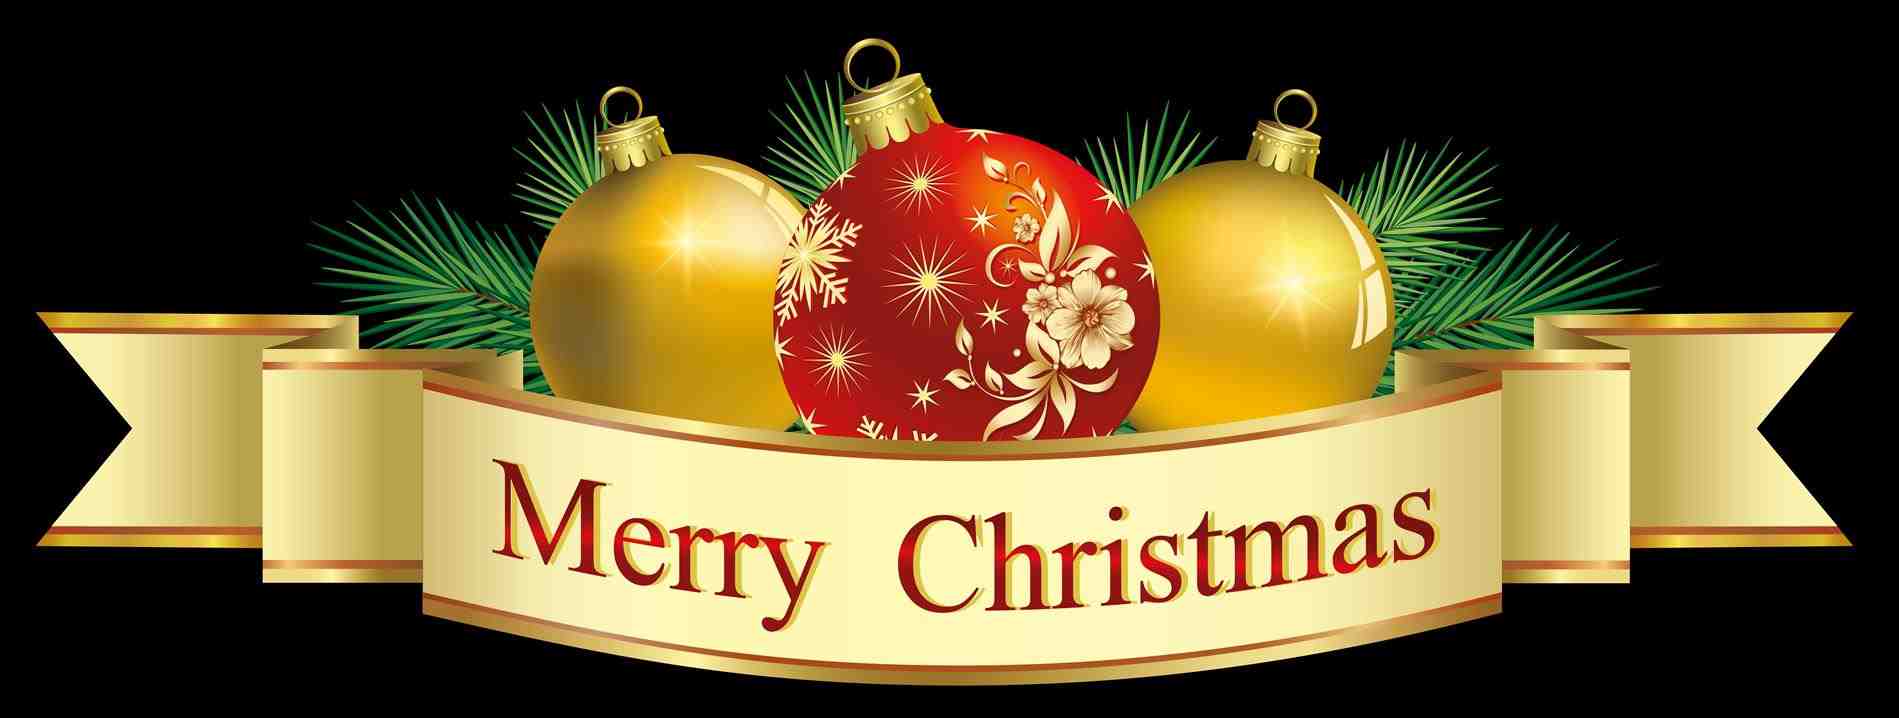 christmas images free clip art christian